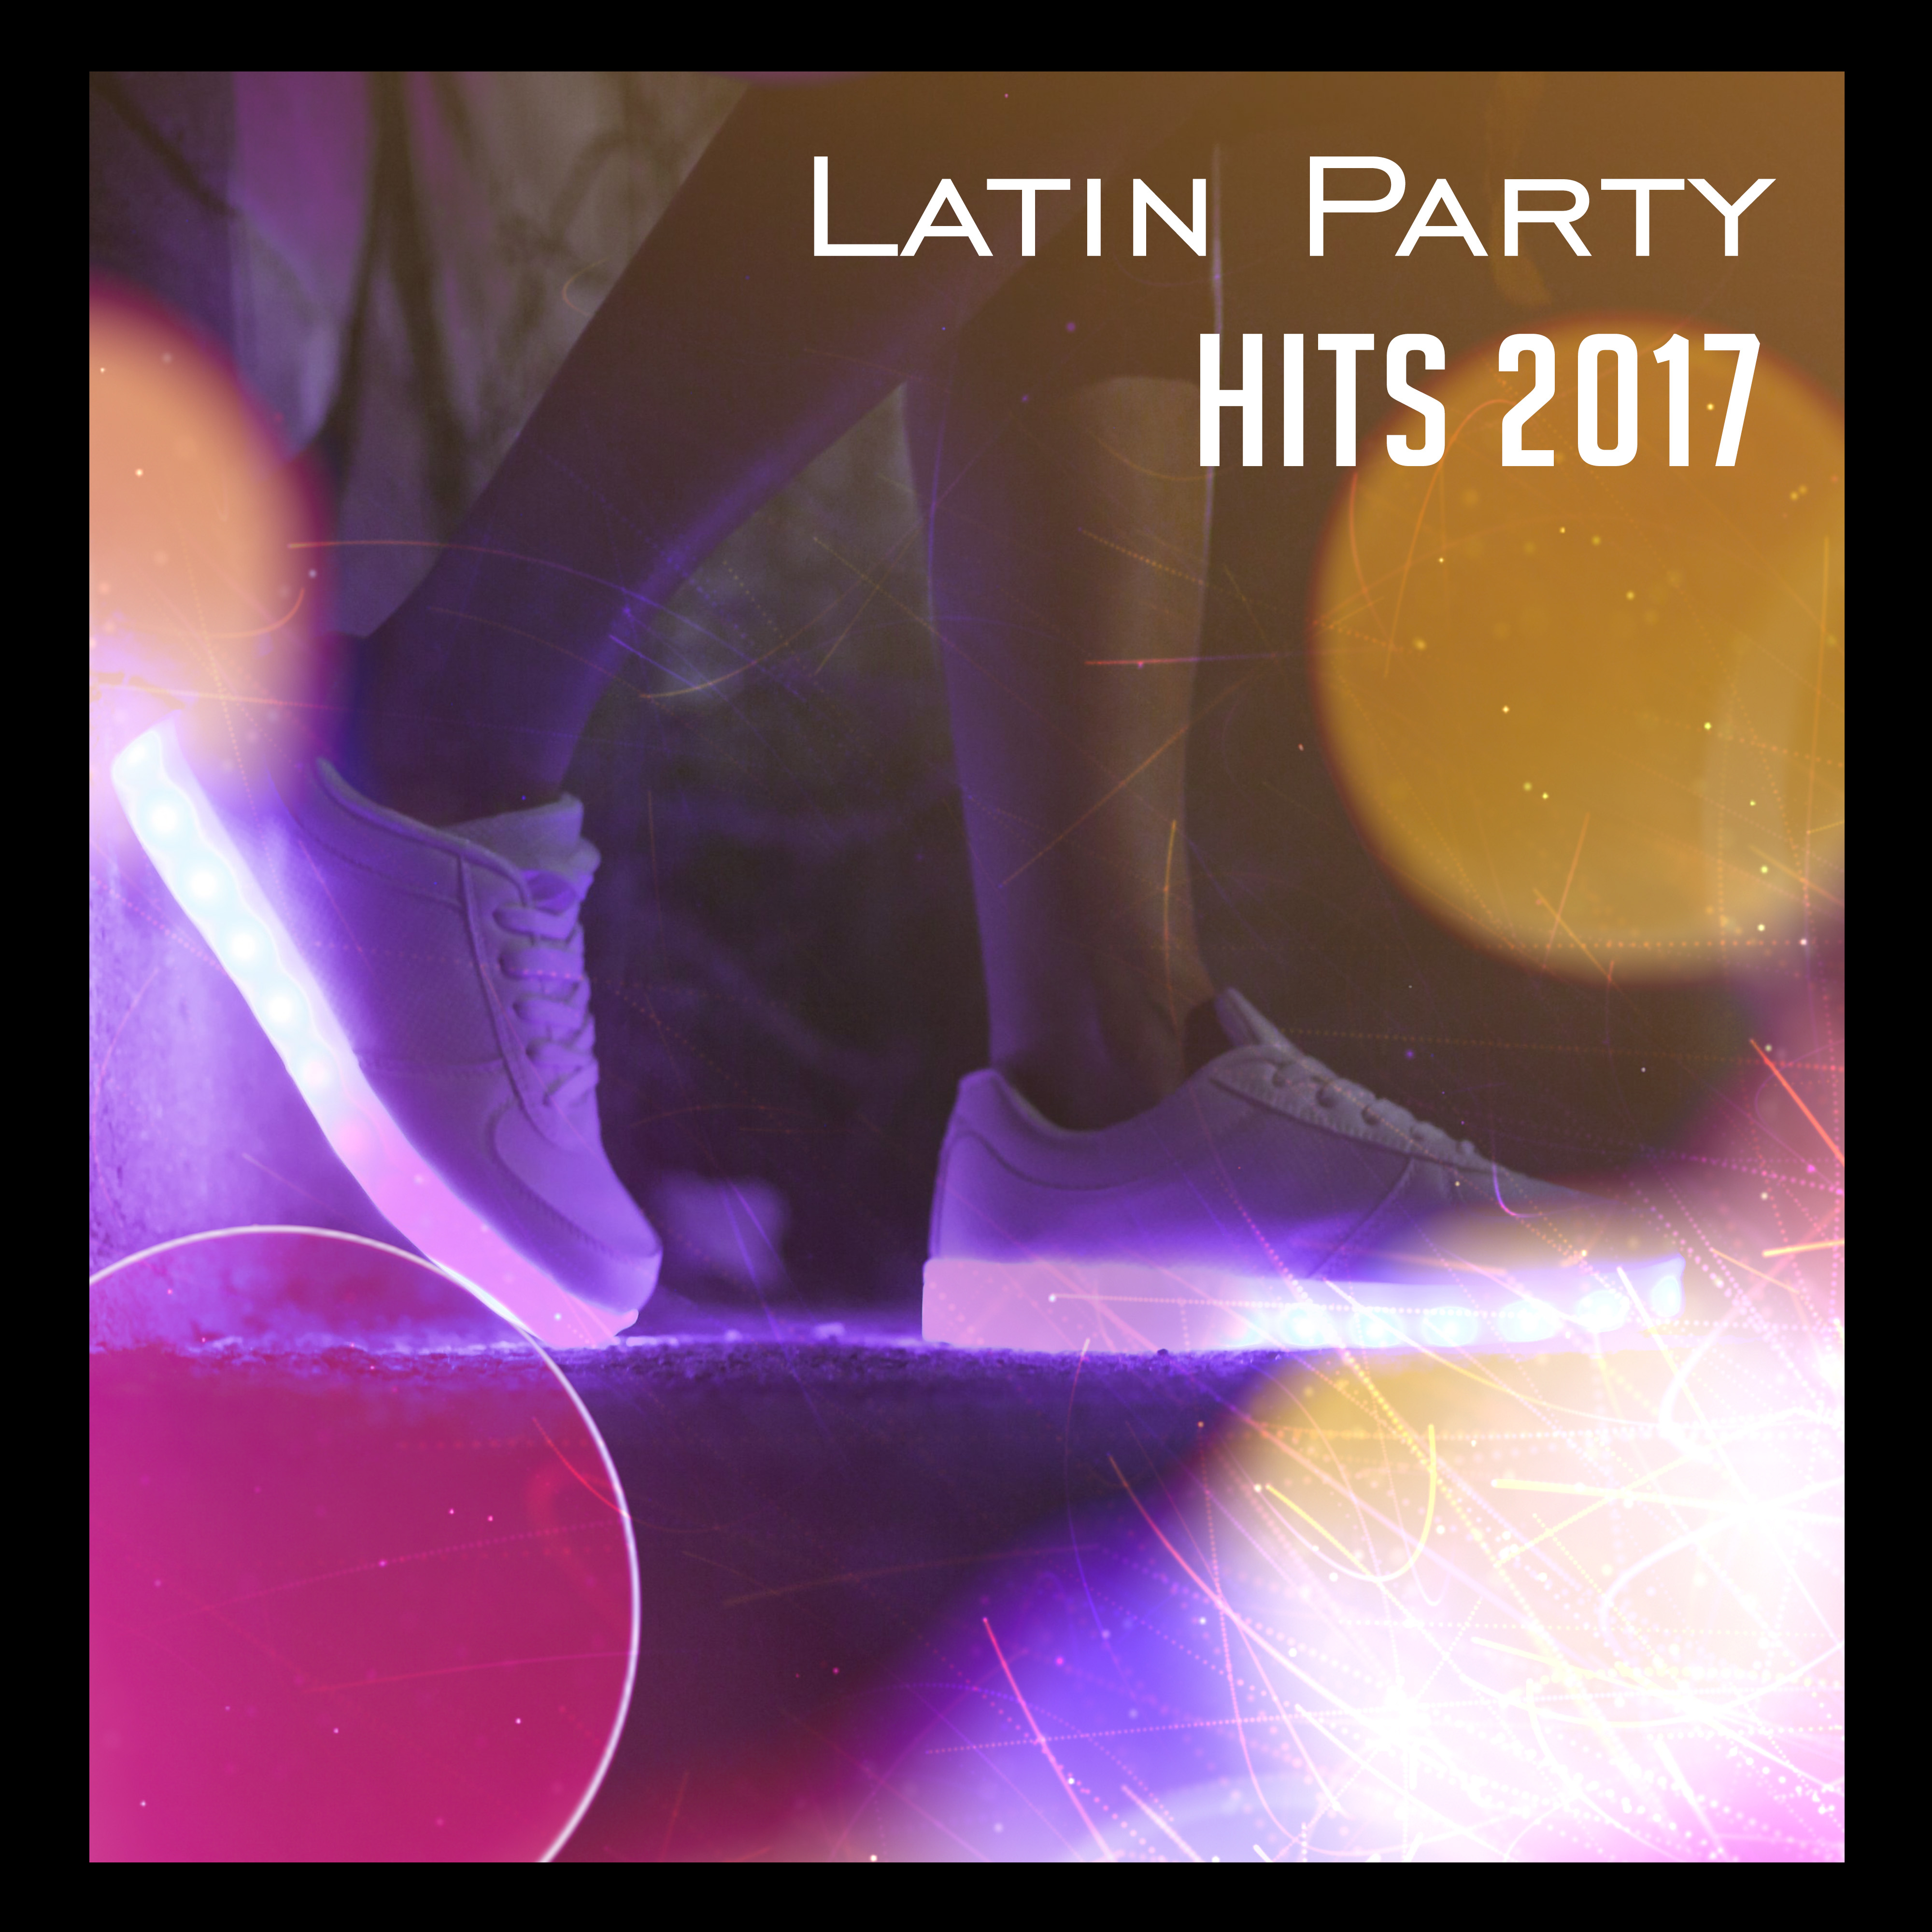 Latin Party Hits 2017 – Music for Dancing: Salsa, Bachata, Mambo, Latino Dance Club, Party Time, Best Latin Sounds